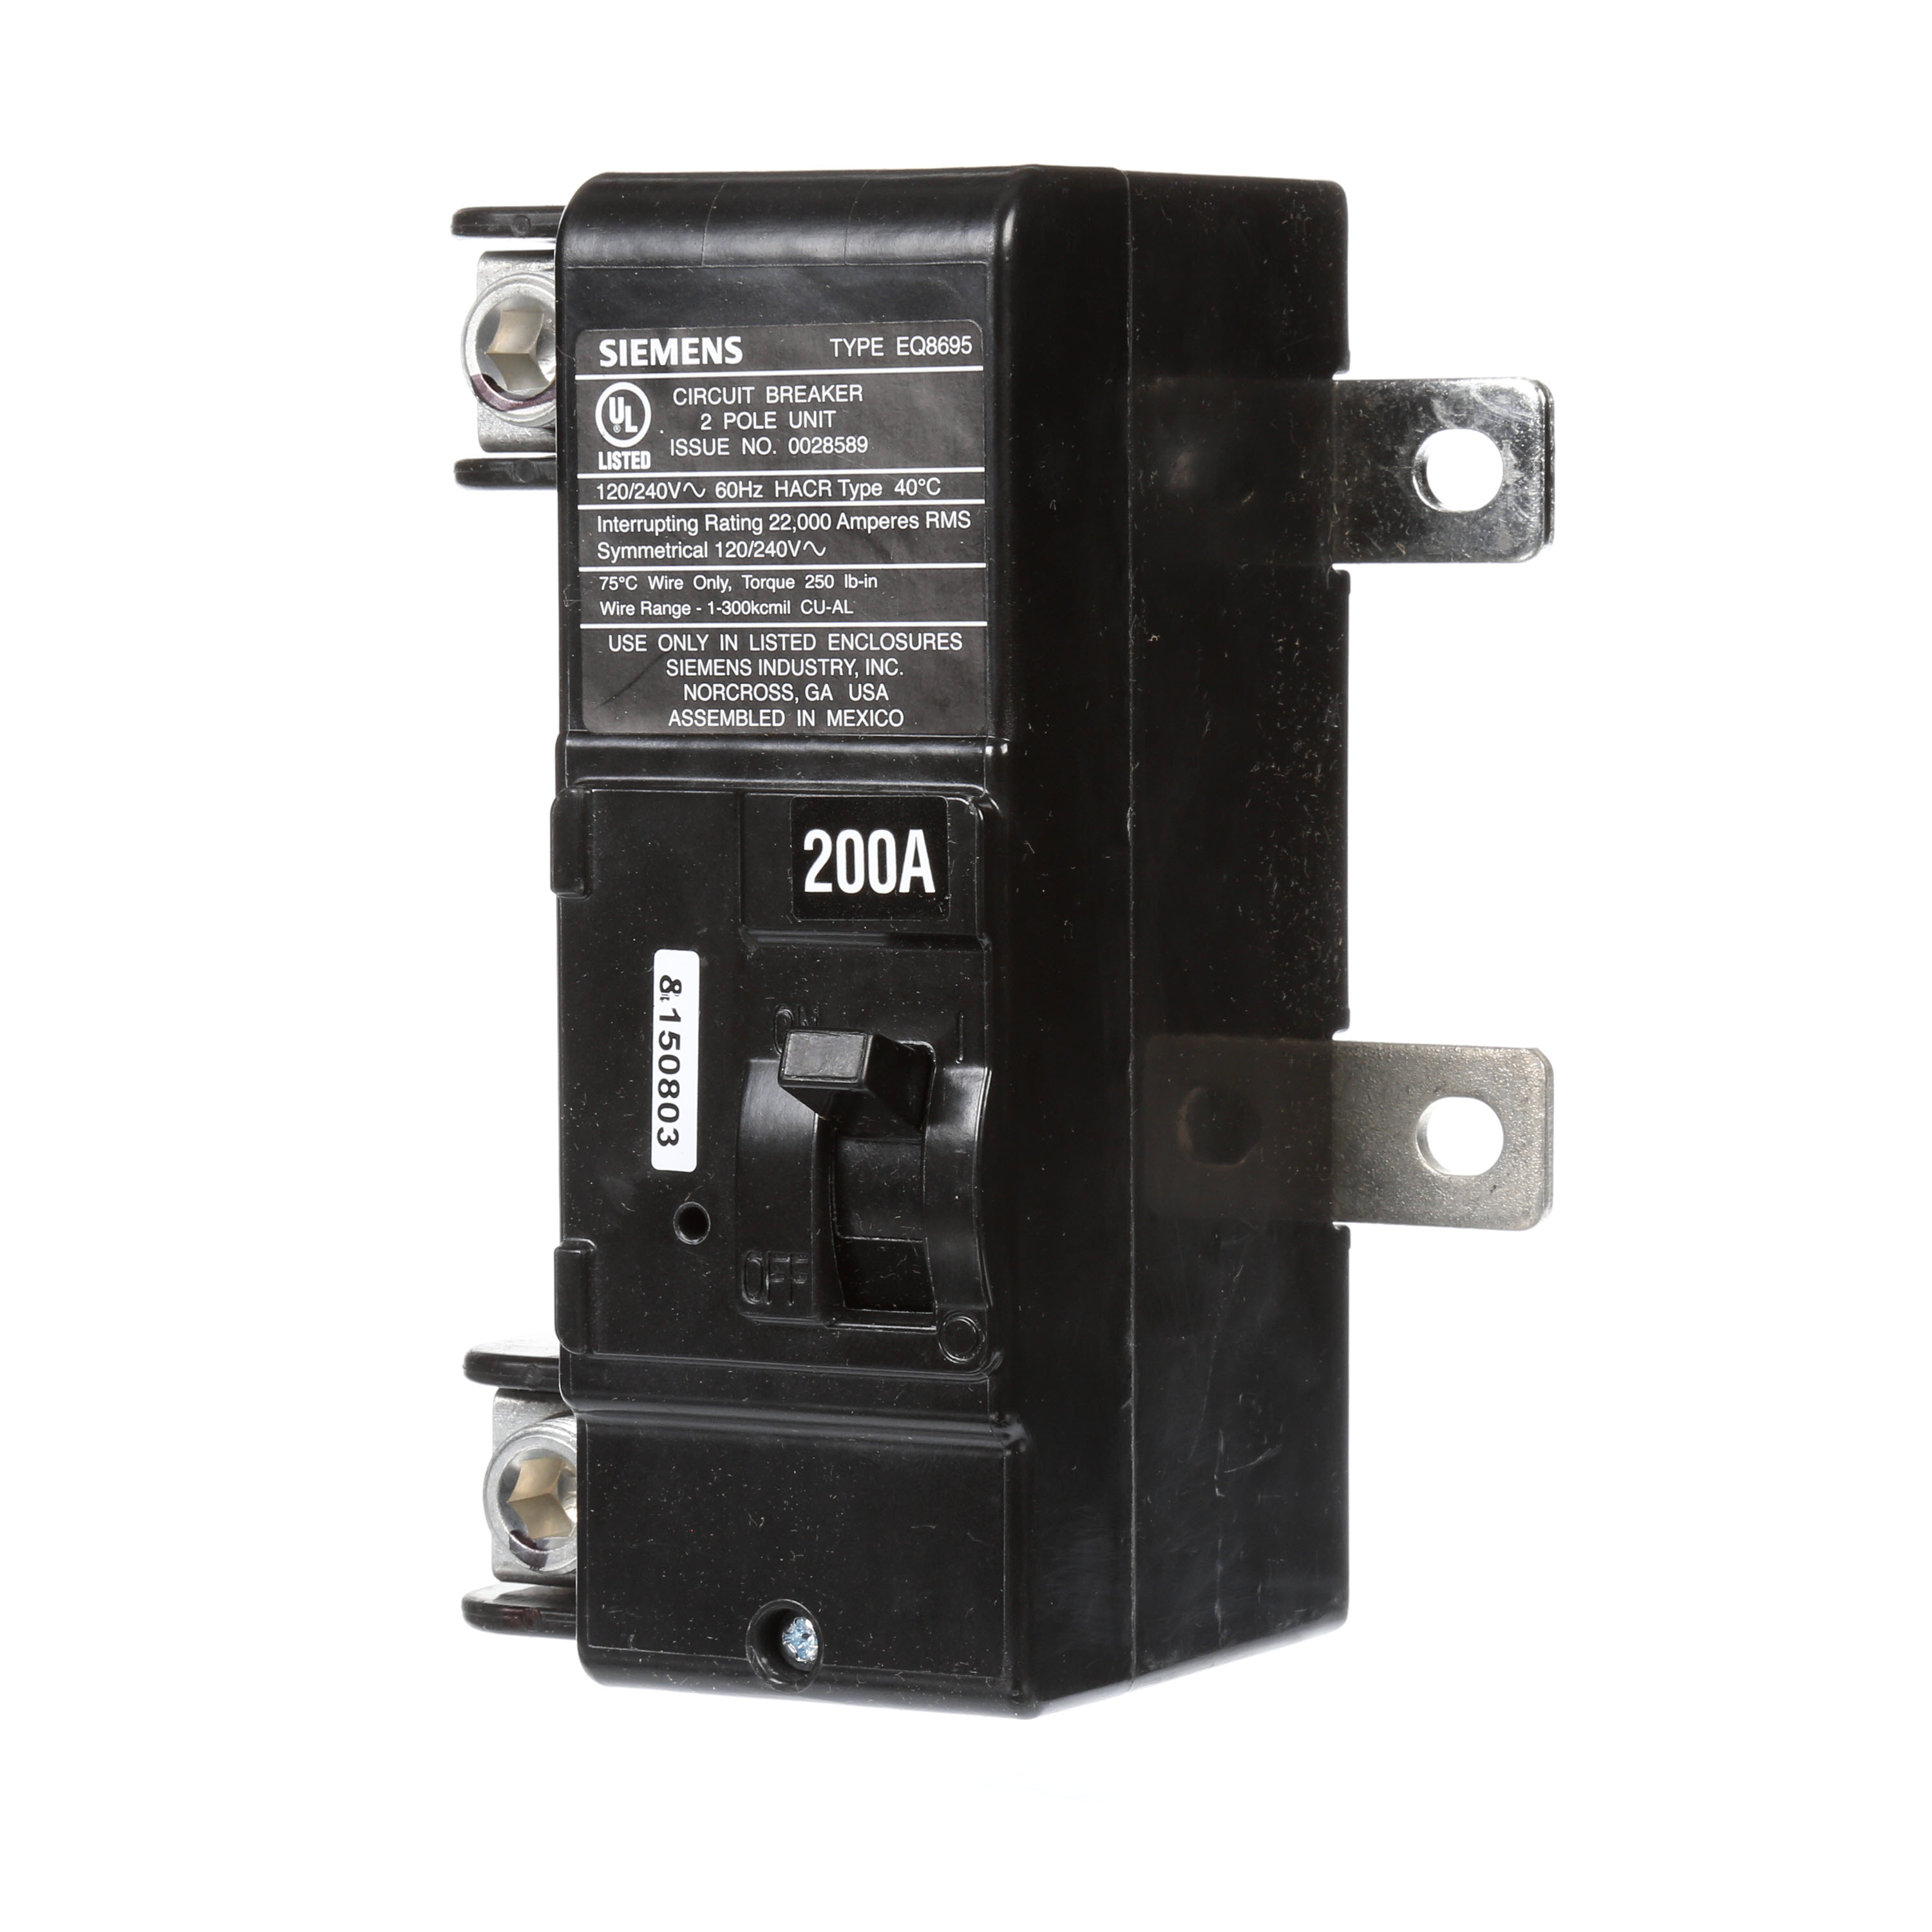 Siemens Low Voltage Residential Circuit Breakers Main Breakers - Family G Mainsare Circuit Protection Load Center Mains, Feeders, and Miniature Circuit Breakers. Load center conversion kit 1-Phase main breaker.. Rated (200 - 225A) AIR 22 KA.